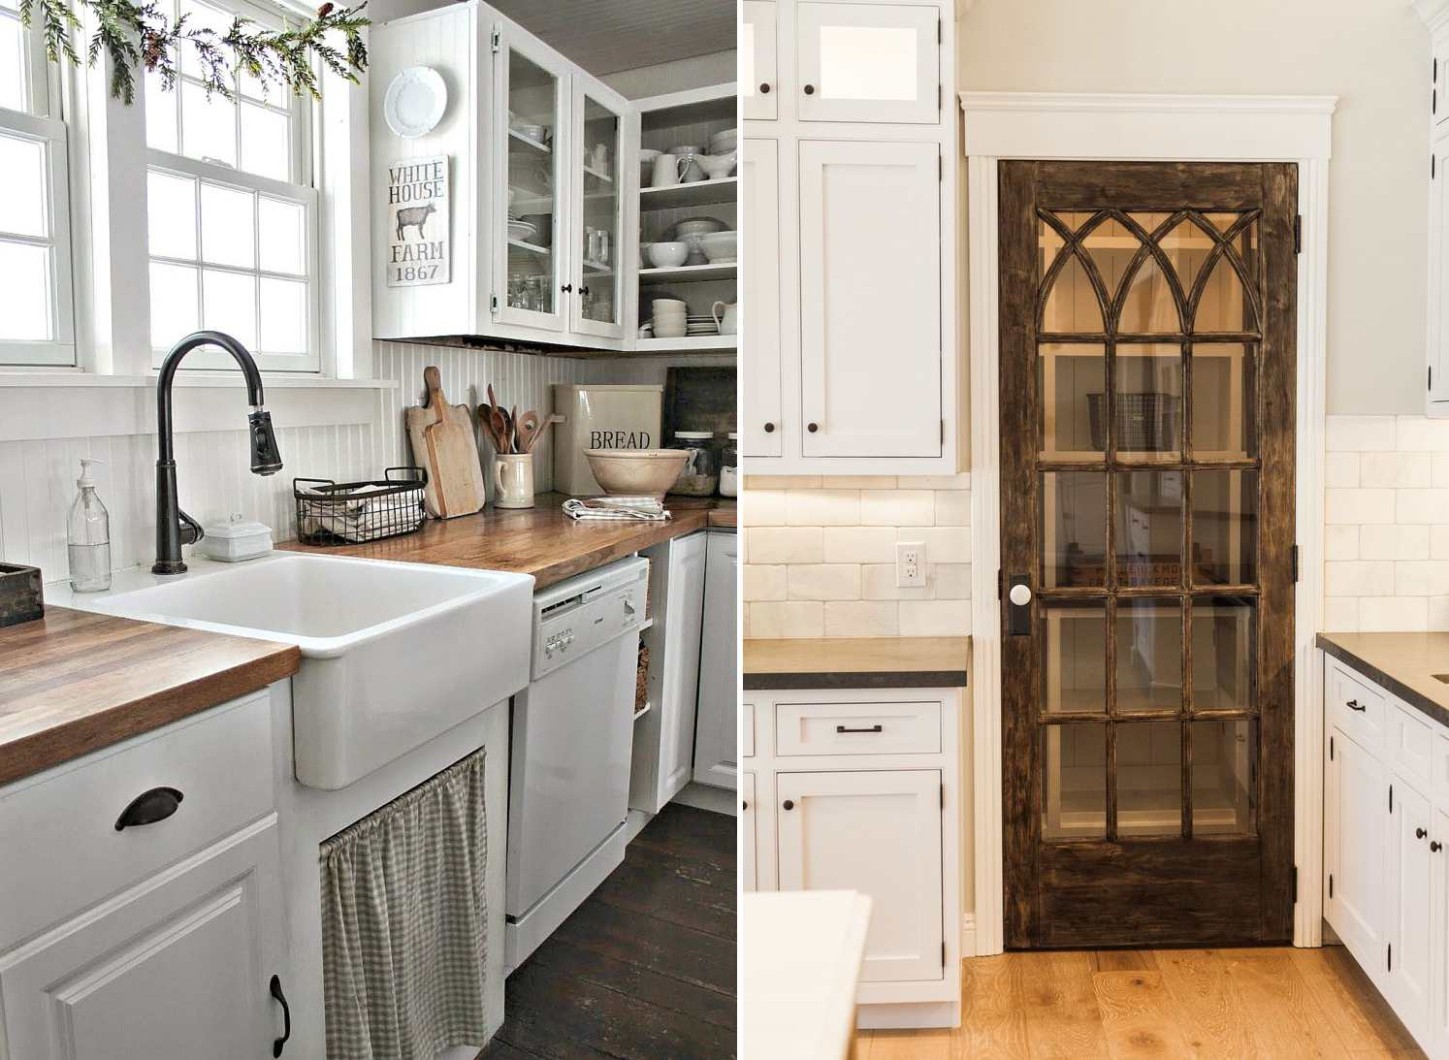 10 Gorgeous Country Kitchens for Your Decorating Inspiration - kitchen cabinet doors country style